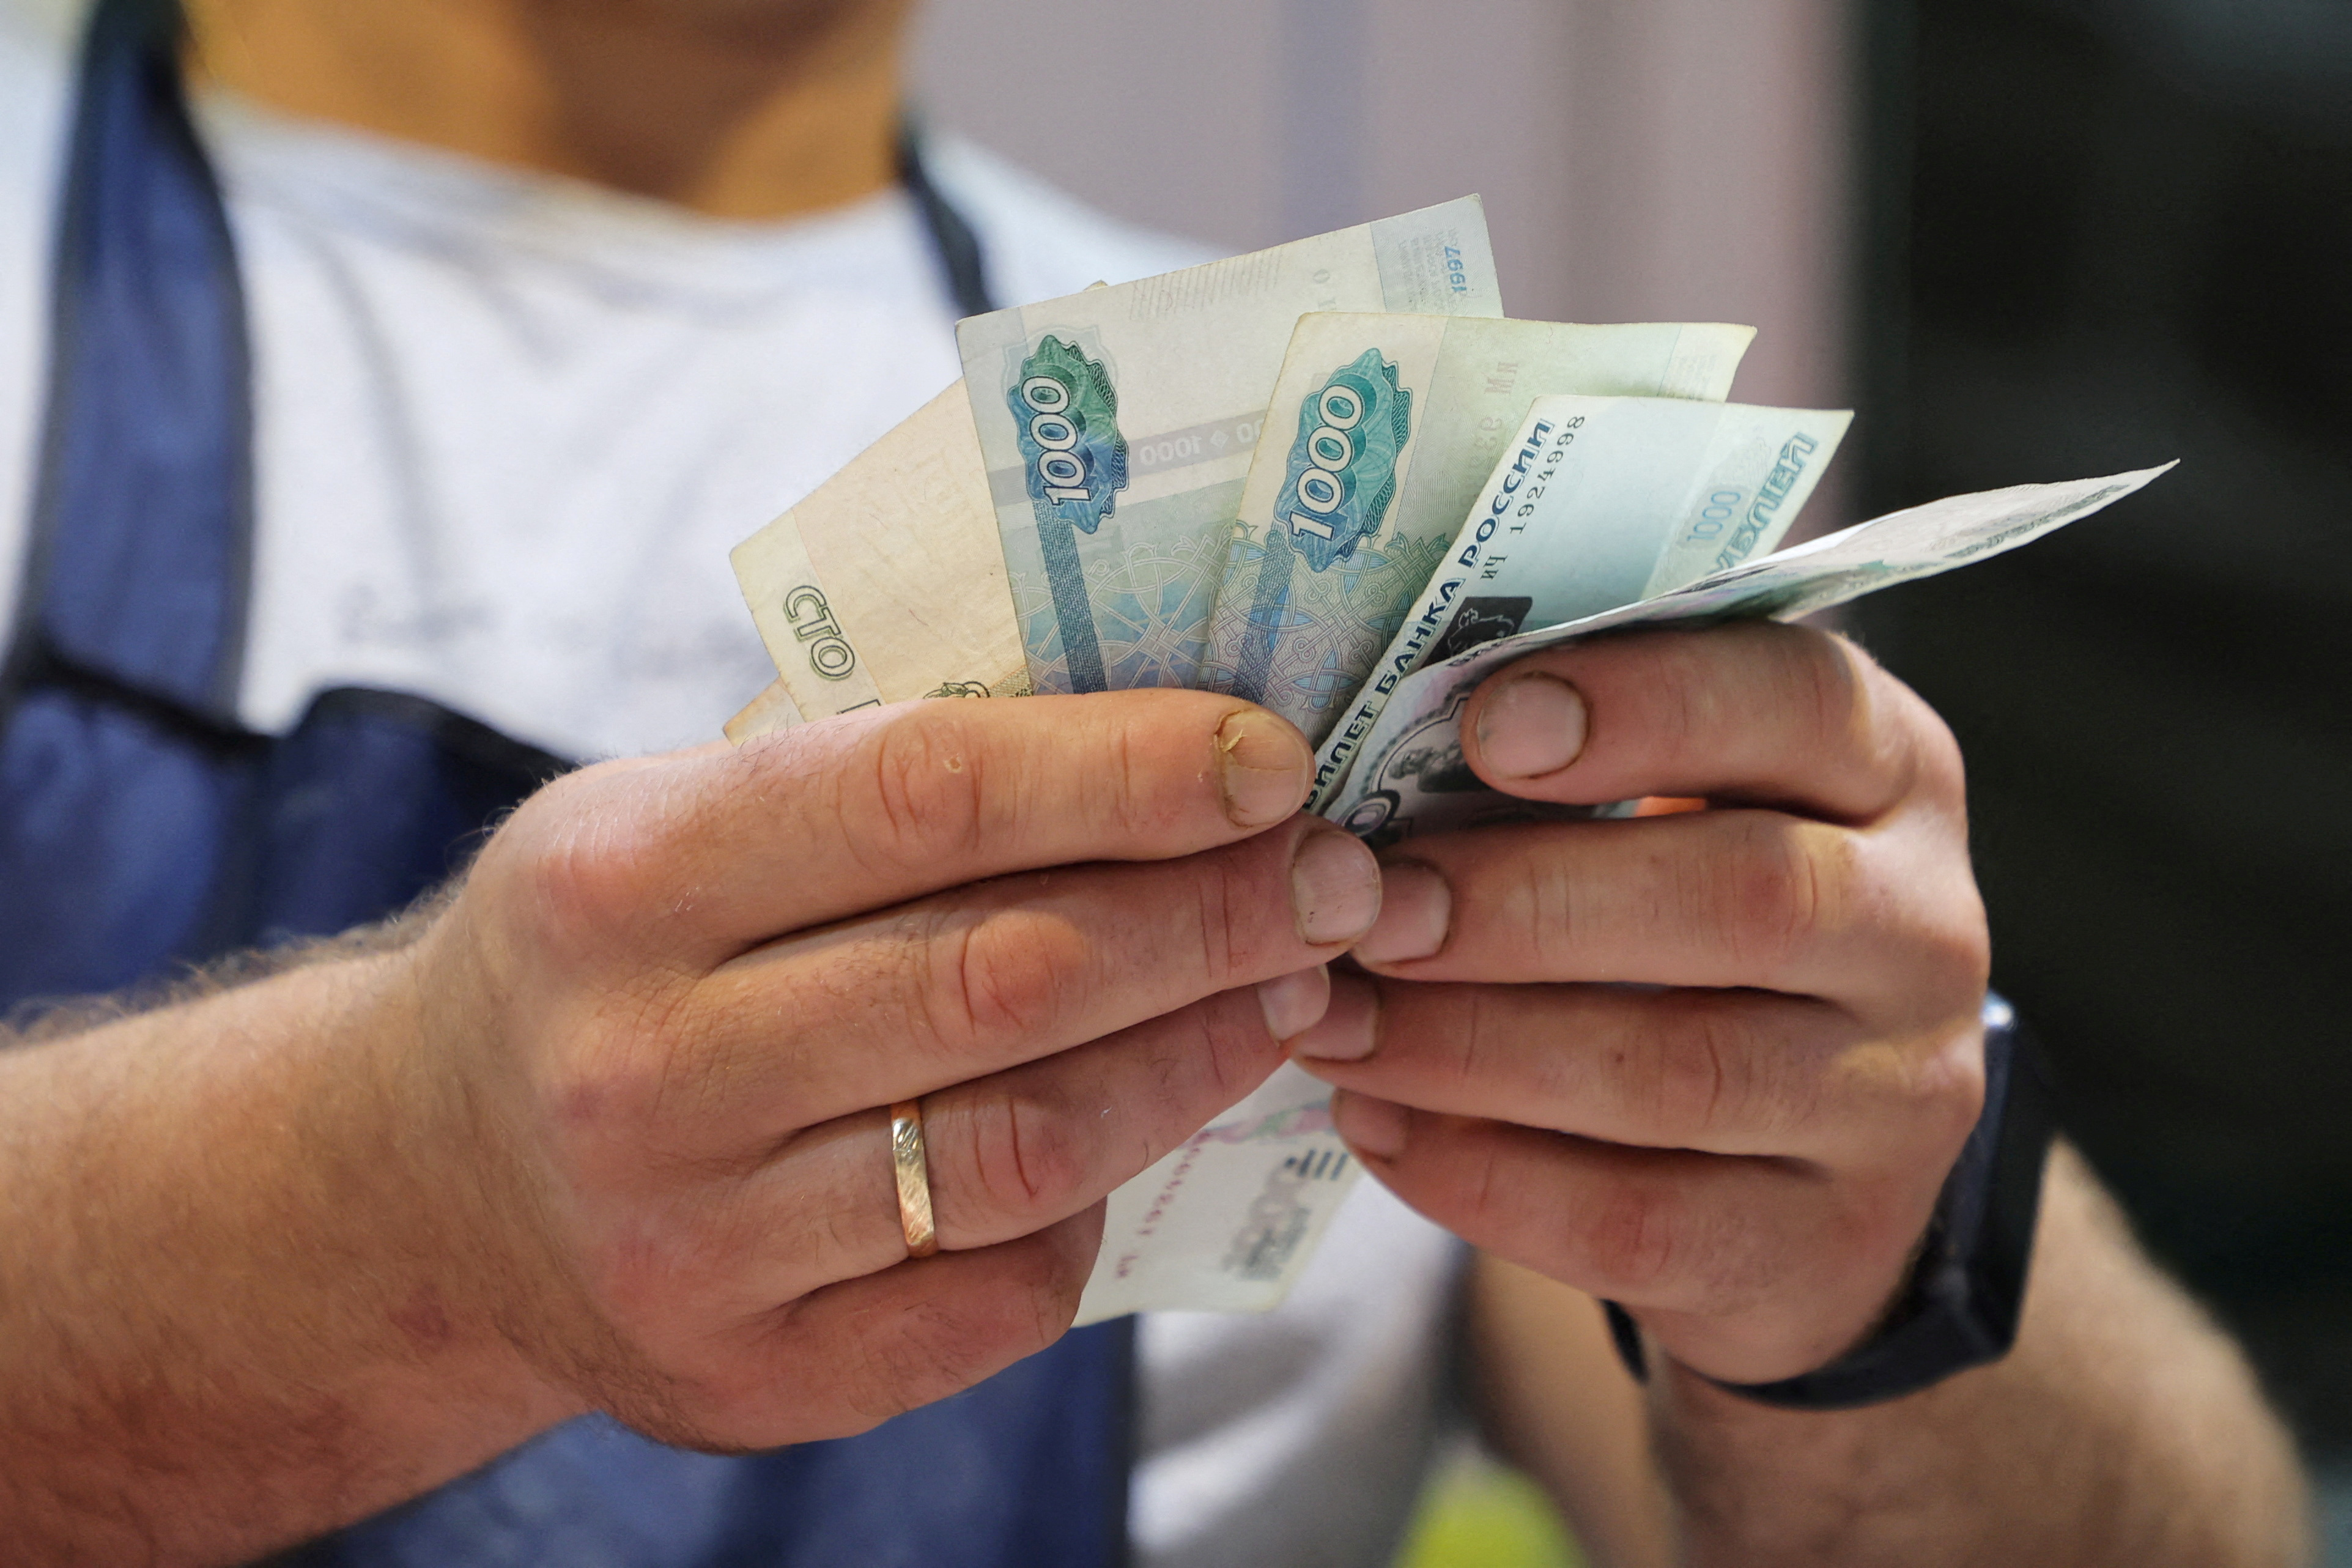 A vendor counts Russian rouble banknotes at a market in Saint Petersburg